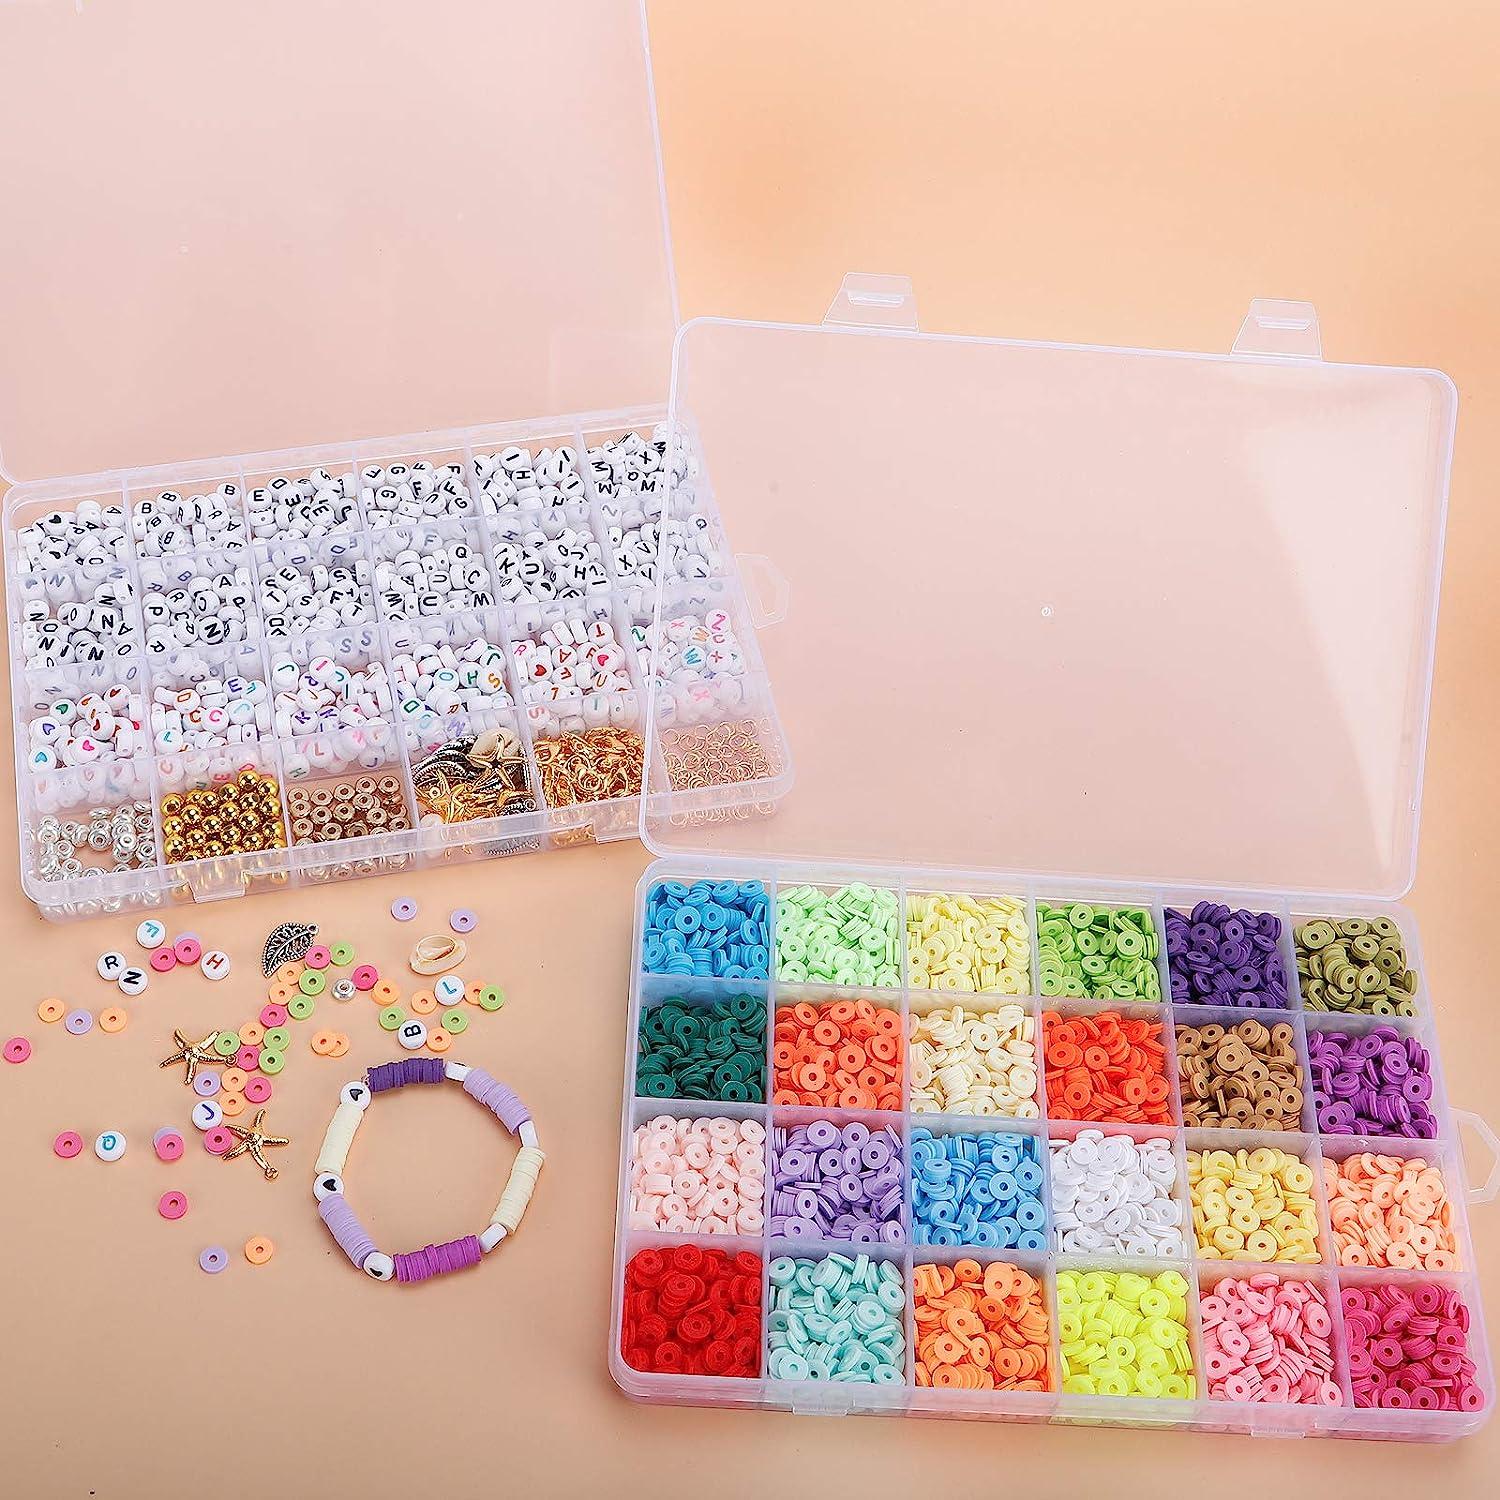 QUEFE 6000pcs 24 Colors Clay Beads for Bracelets Making Kit, Charm Bracelets  Making for Girls 8-12, Letter Beads for Jewelry Making, Polymer Heishi  Beads, for Preppy, Christmas Gifts, Crafts